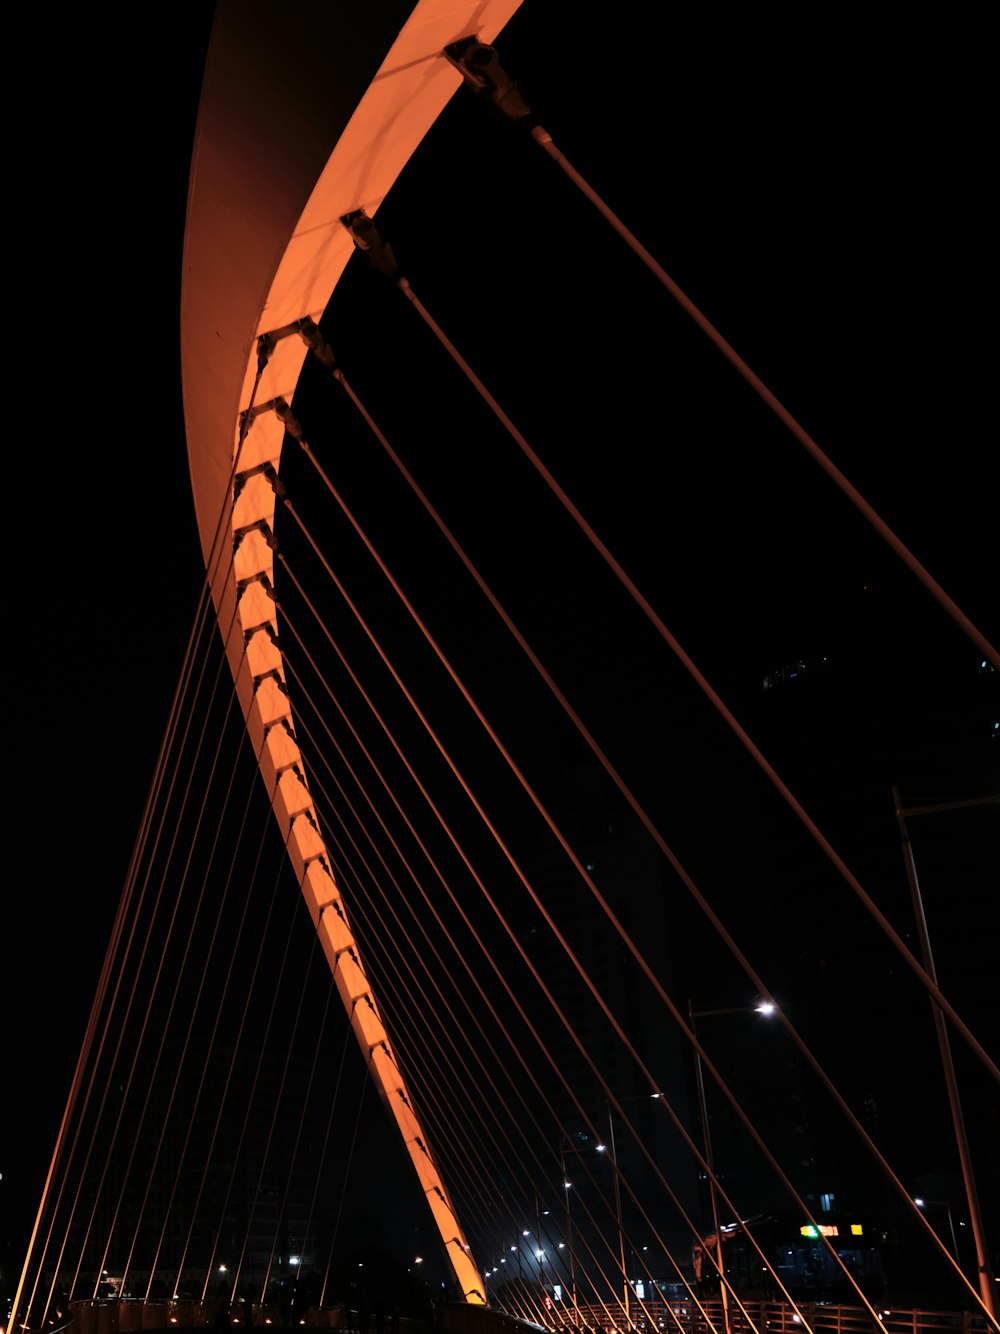 a view of a very tall bridge at night